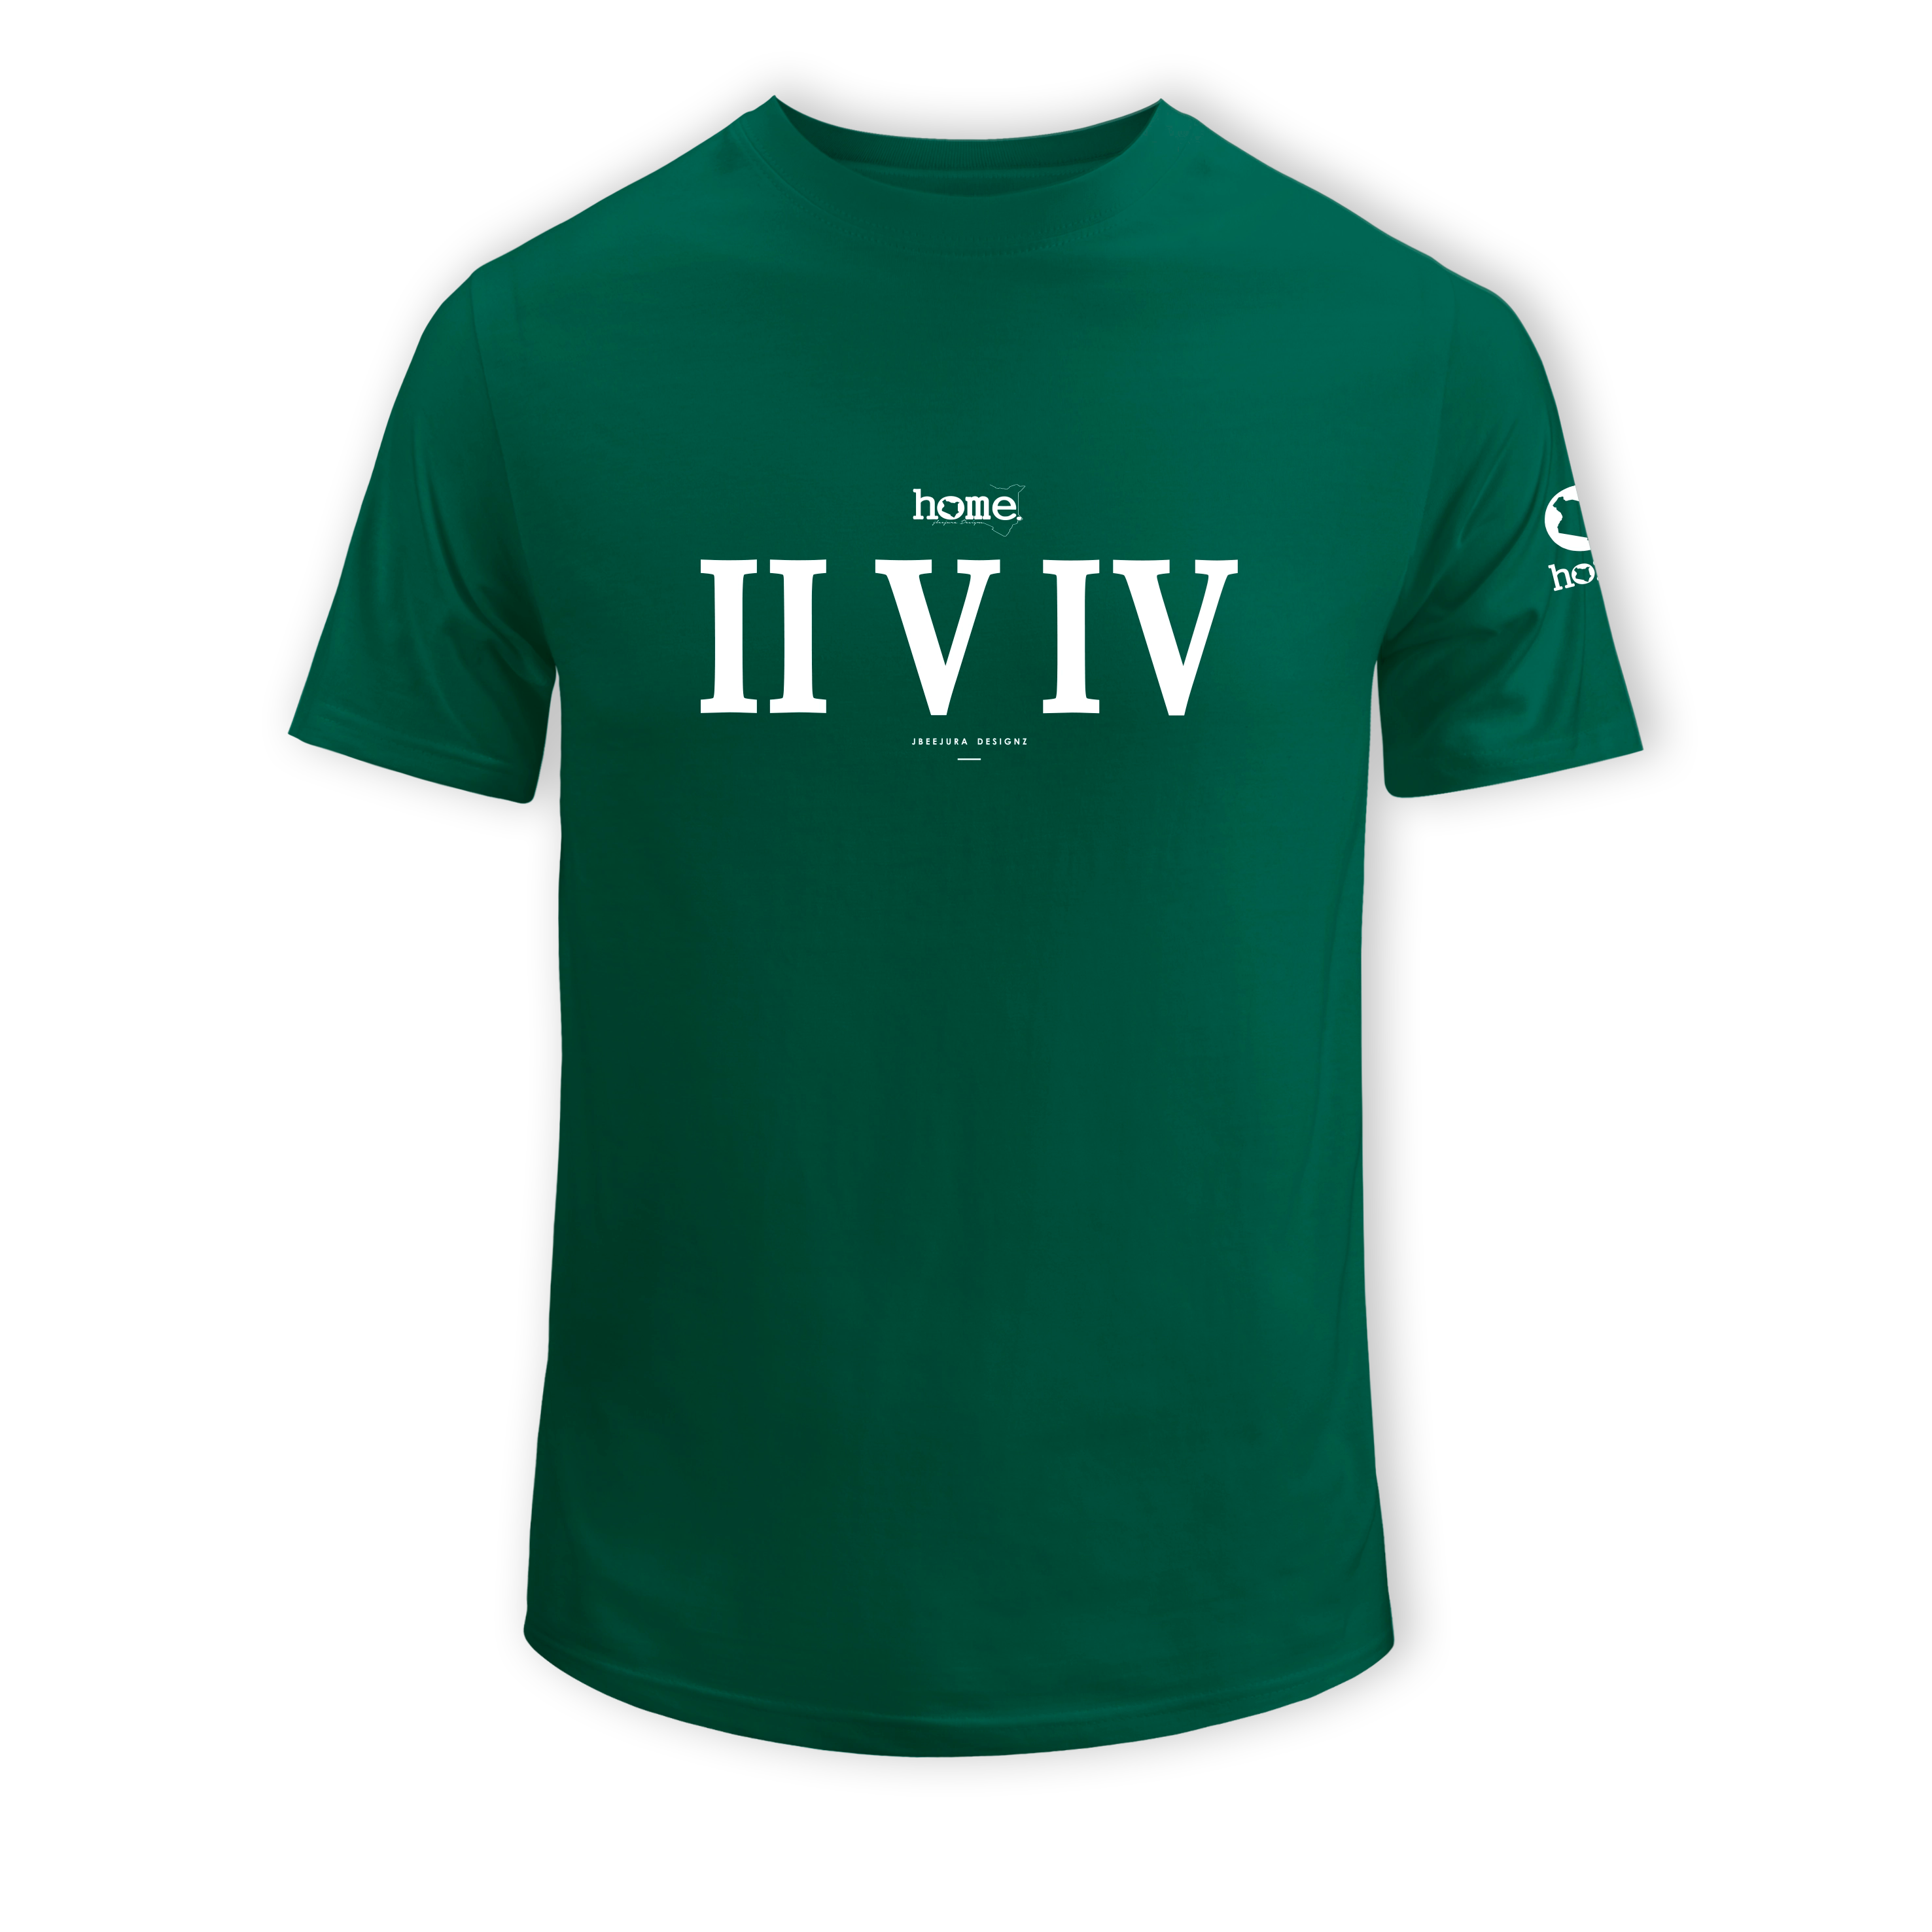 home_254 SHORT-SLEEVED RICH GREEN T-SHIRT WITH A WHITE ROMAN NUMERALS PRINT – COTTON PLUS FABRIC